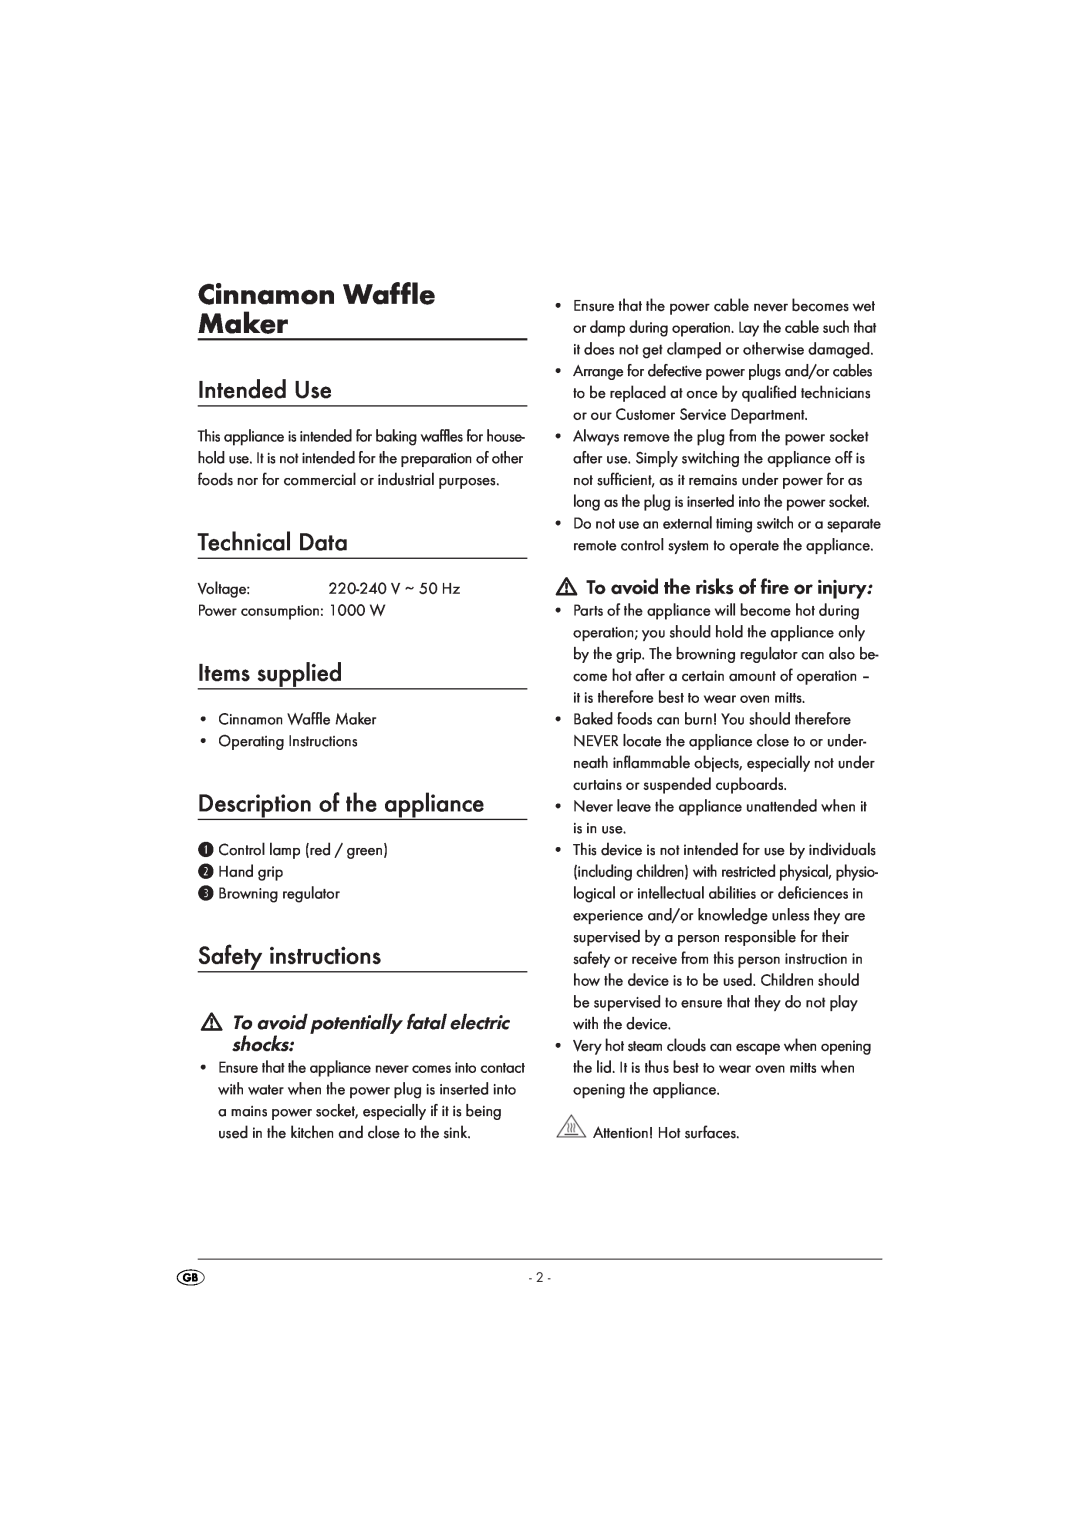 Silvercrest SZW 1000 A1 Cinnamon Waffle Maker, Intended Use, Technical Data, Items supplied, Description of the appliance 